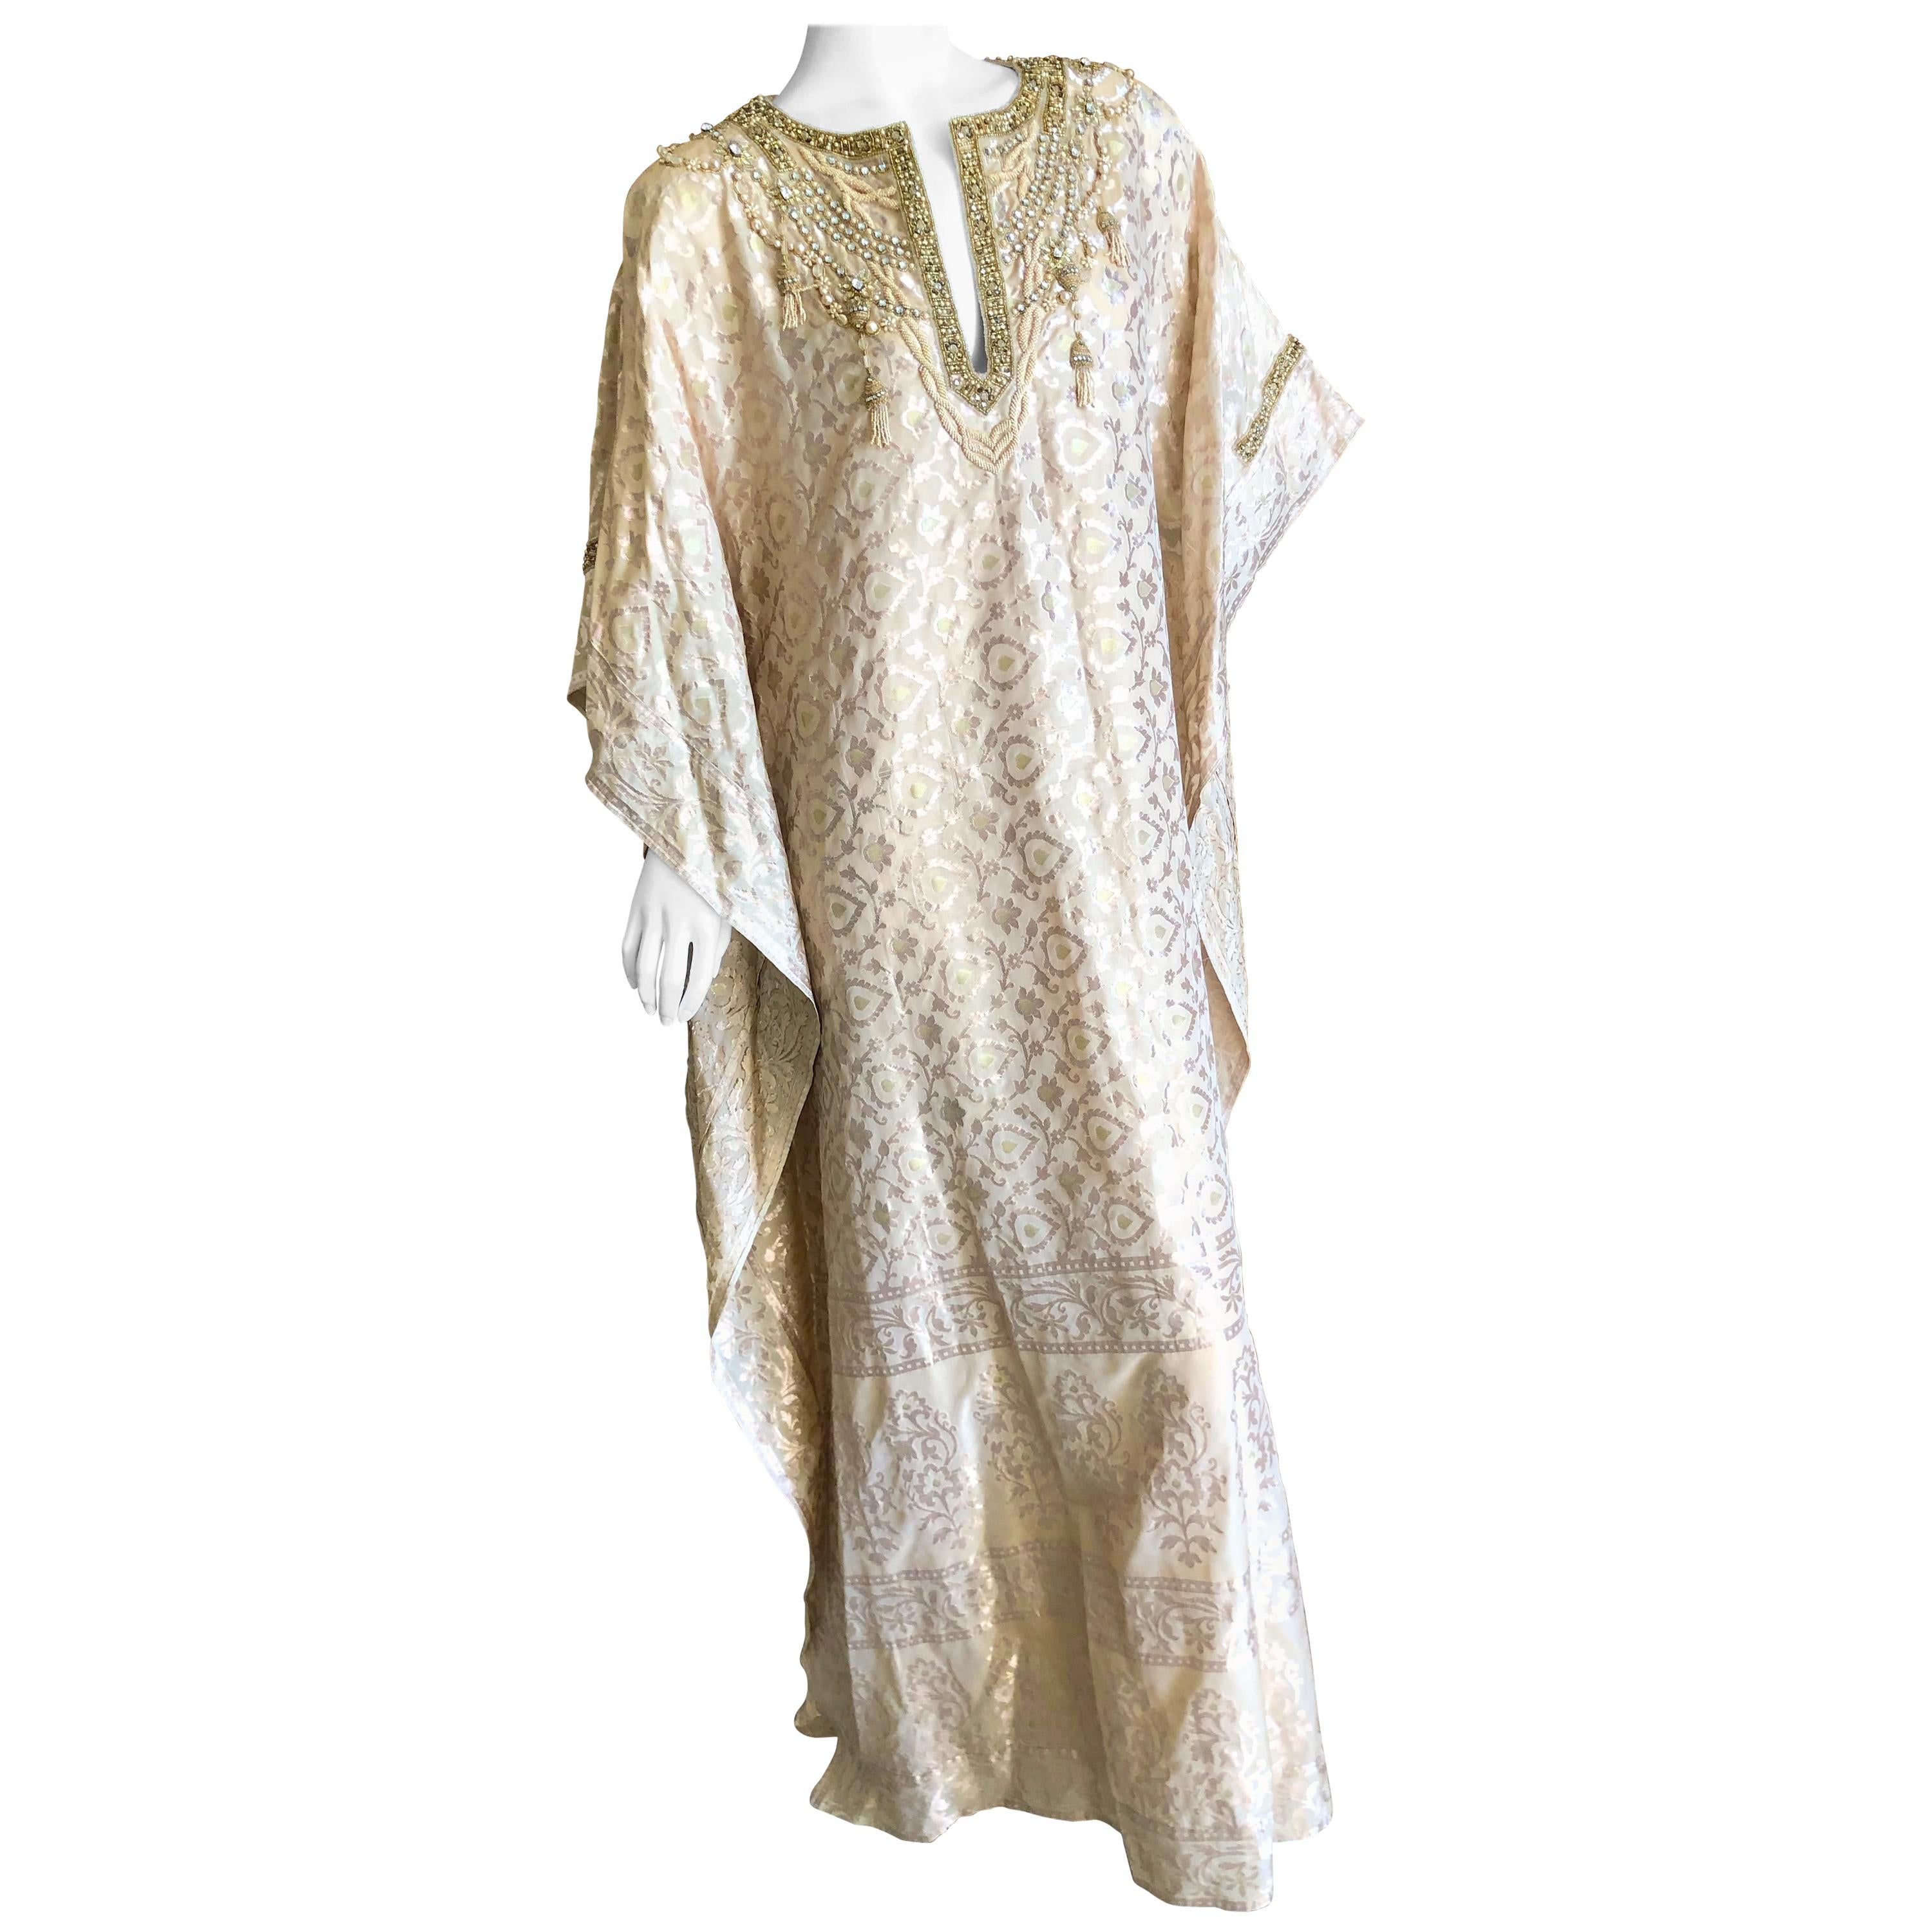 Badgley Mishka Couture Richly Jeweled & Pearl Embellished Gold Silk Caftan NEW